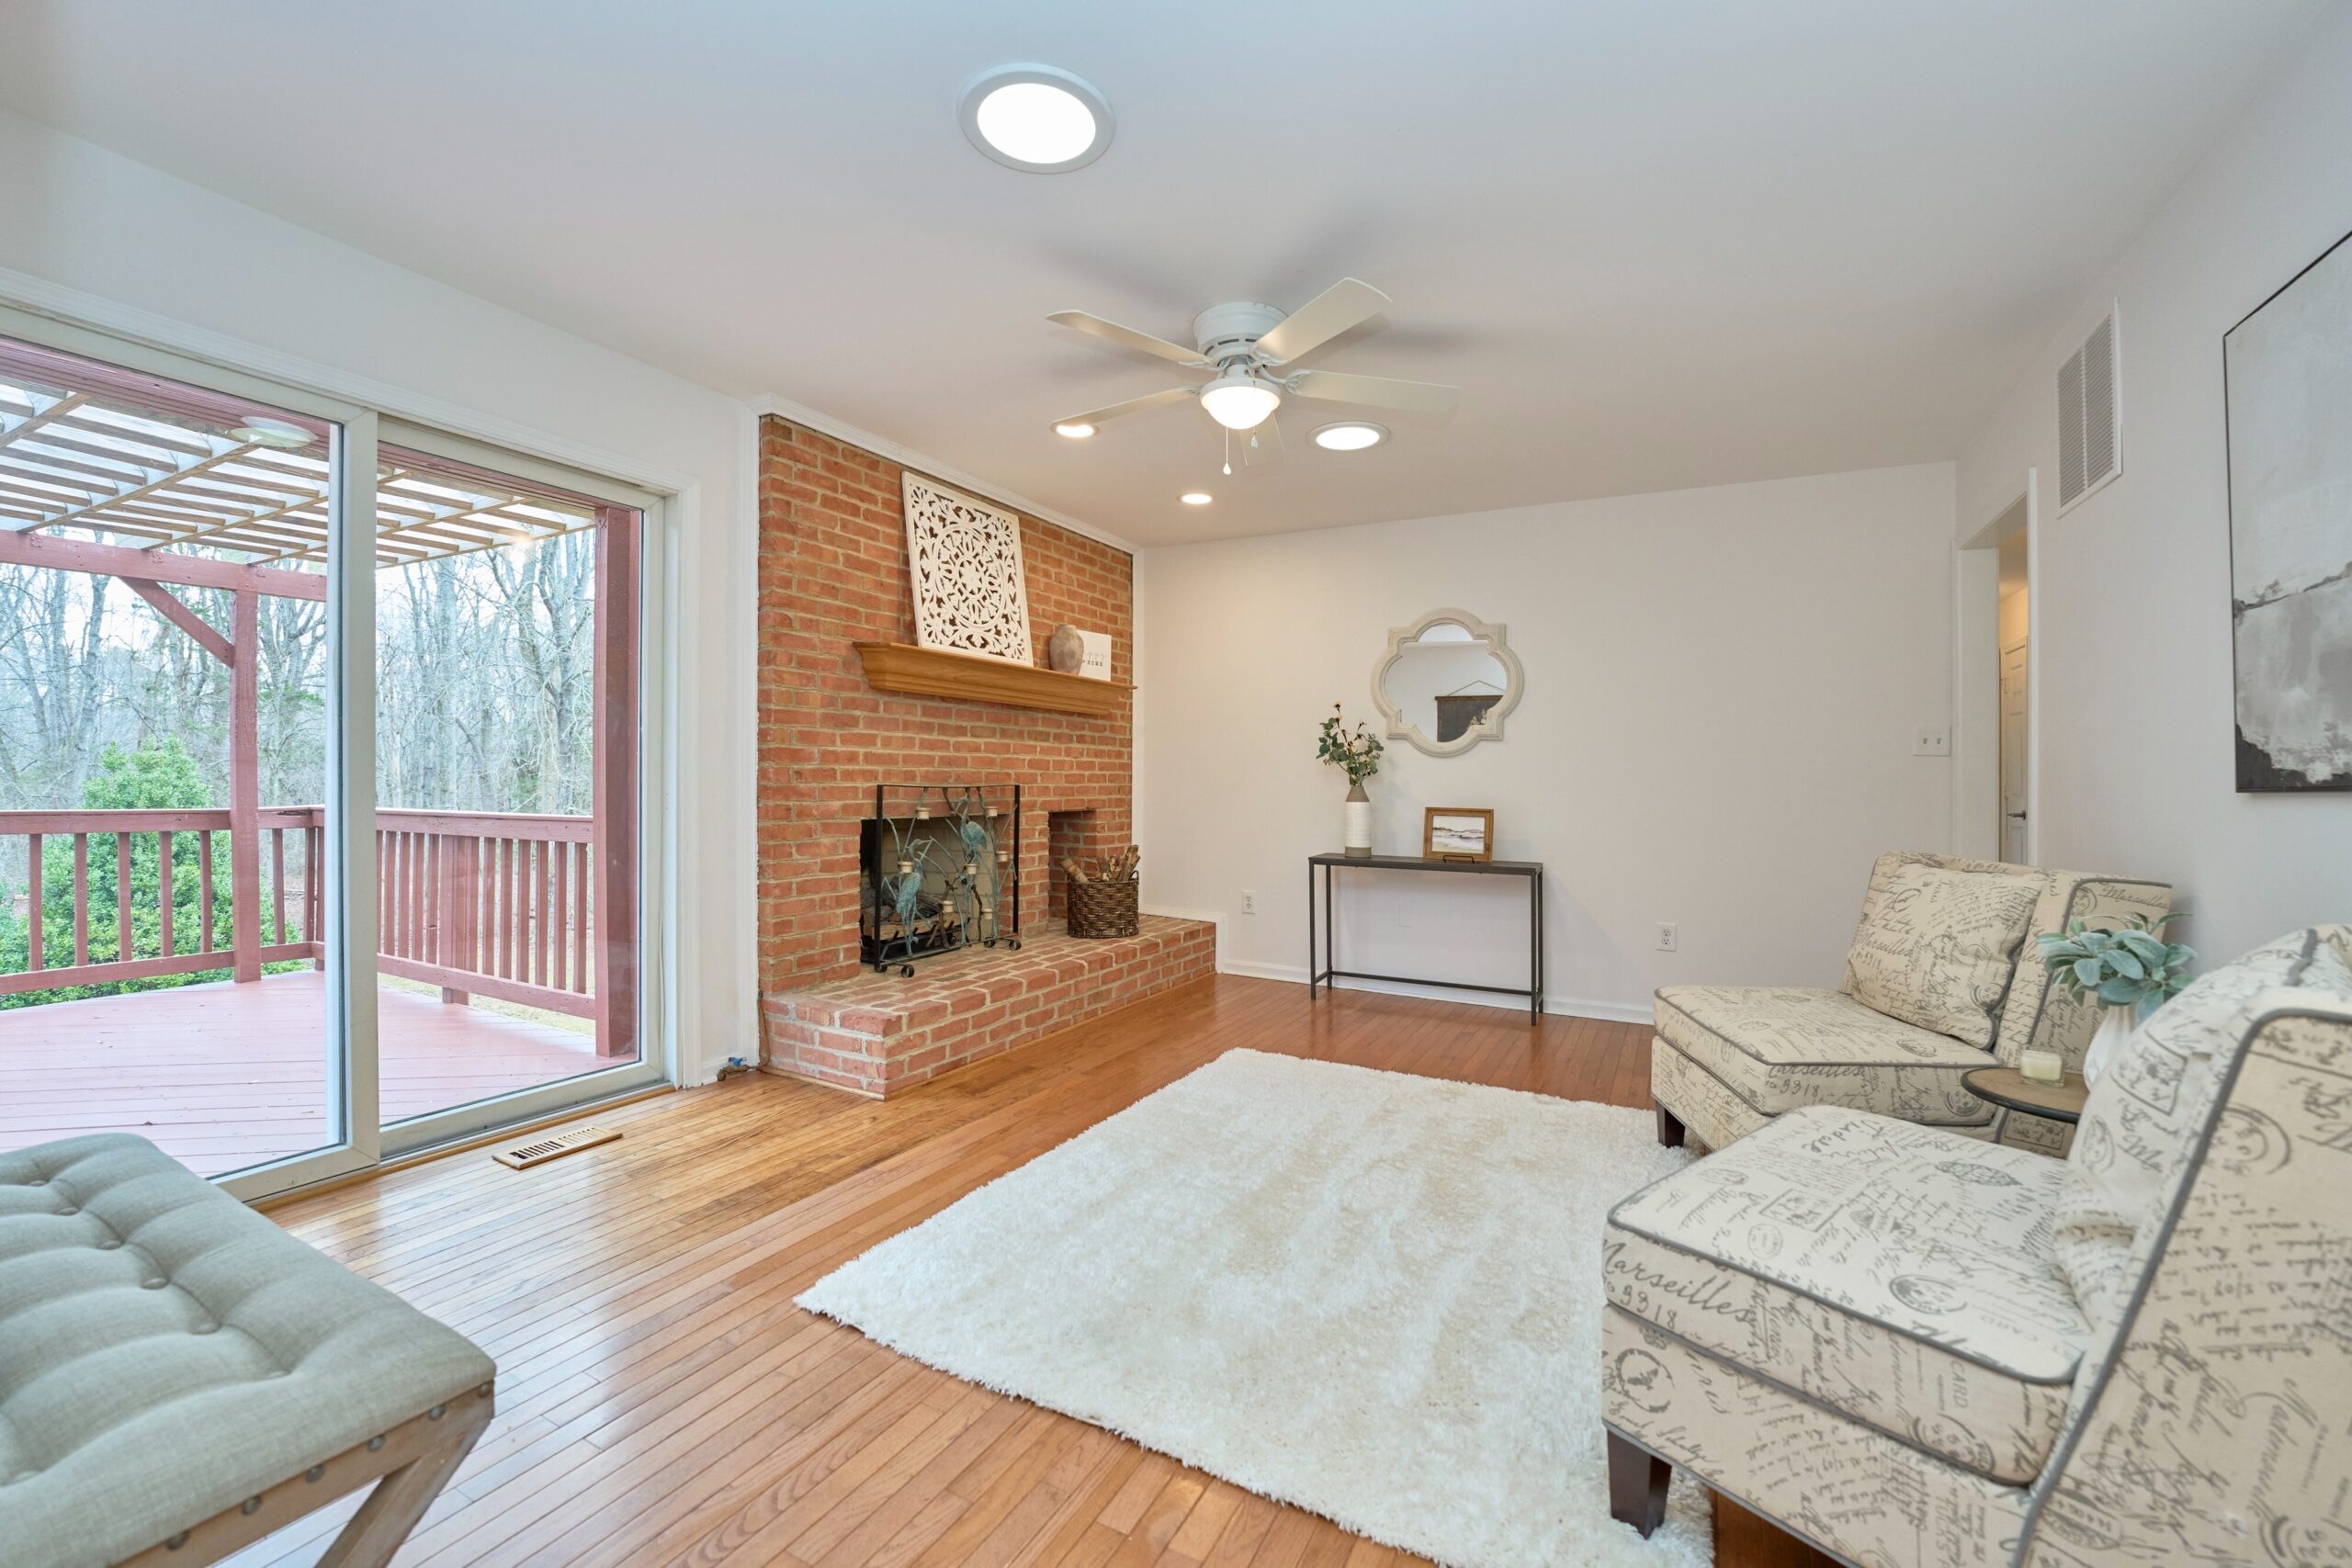 Professional interior photo of 3103 Indian Run Rd - showing the upstairs living room with brick fireplace, hardwood floors, and sliding glass doors to the rear deck off the main level